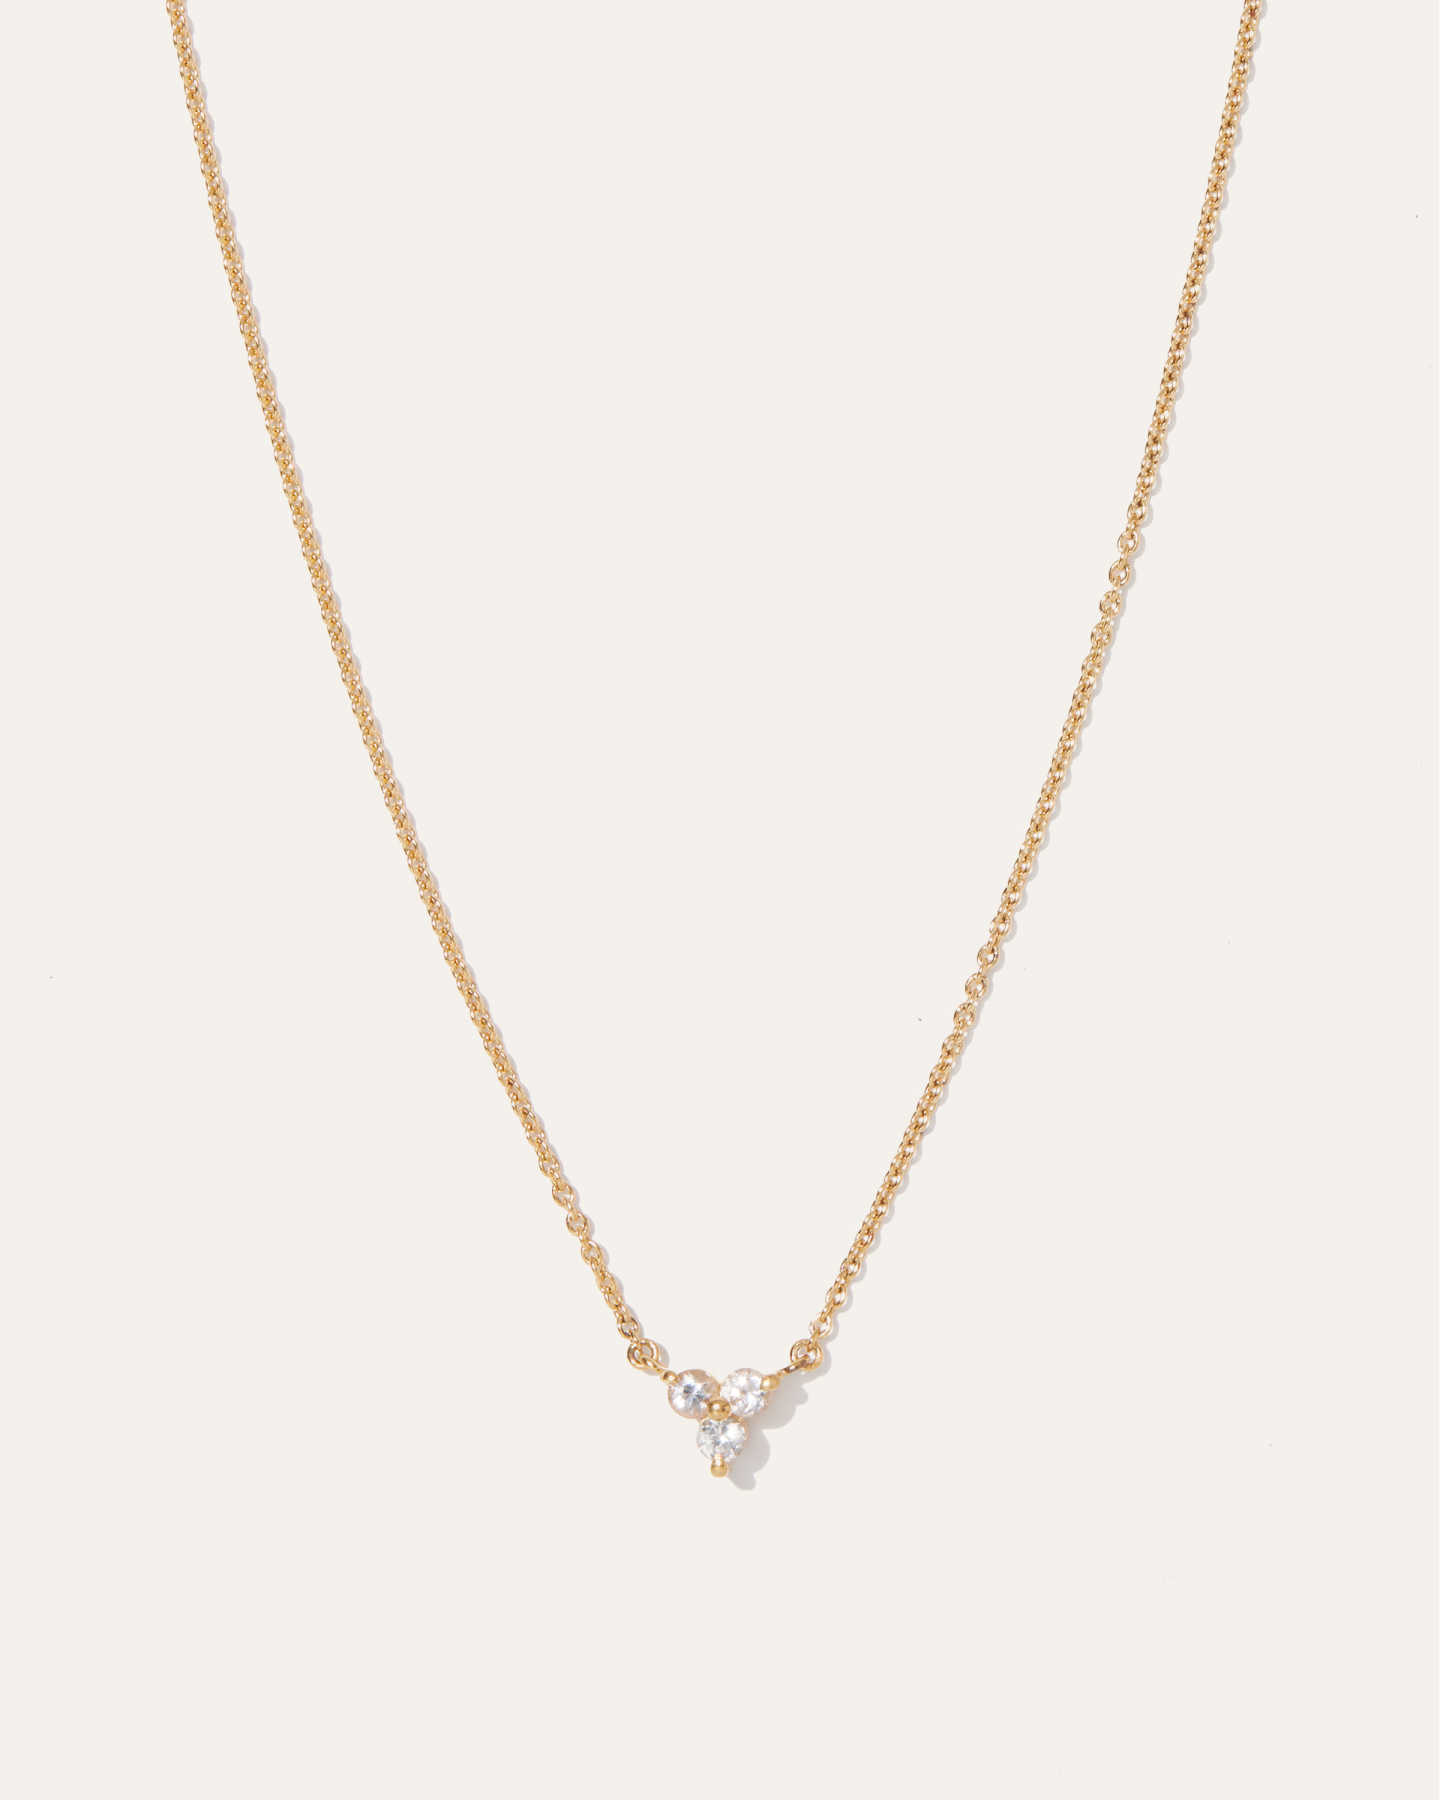 You May Also Like - White Sapphire Triad Necklace - Gold Vermeil